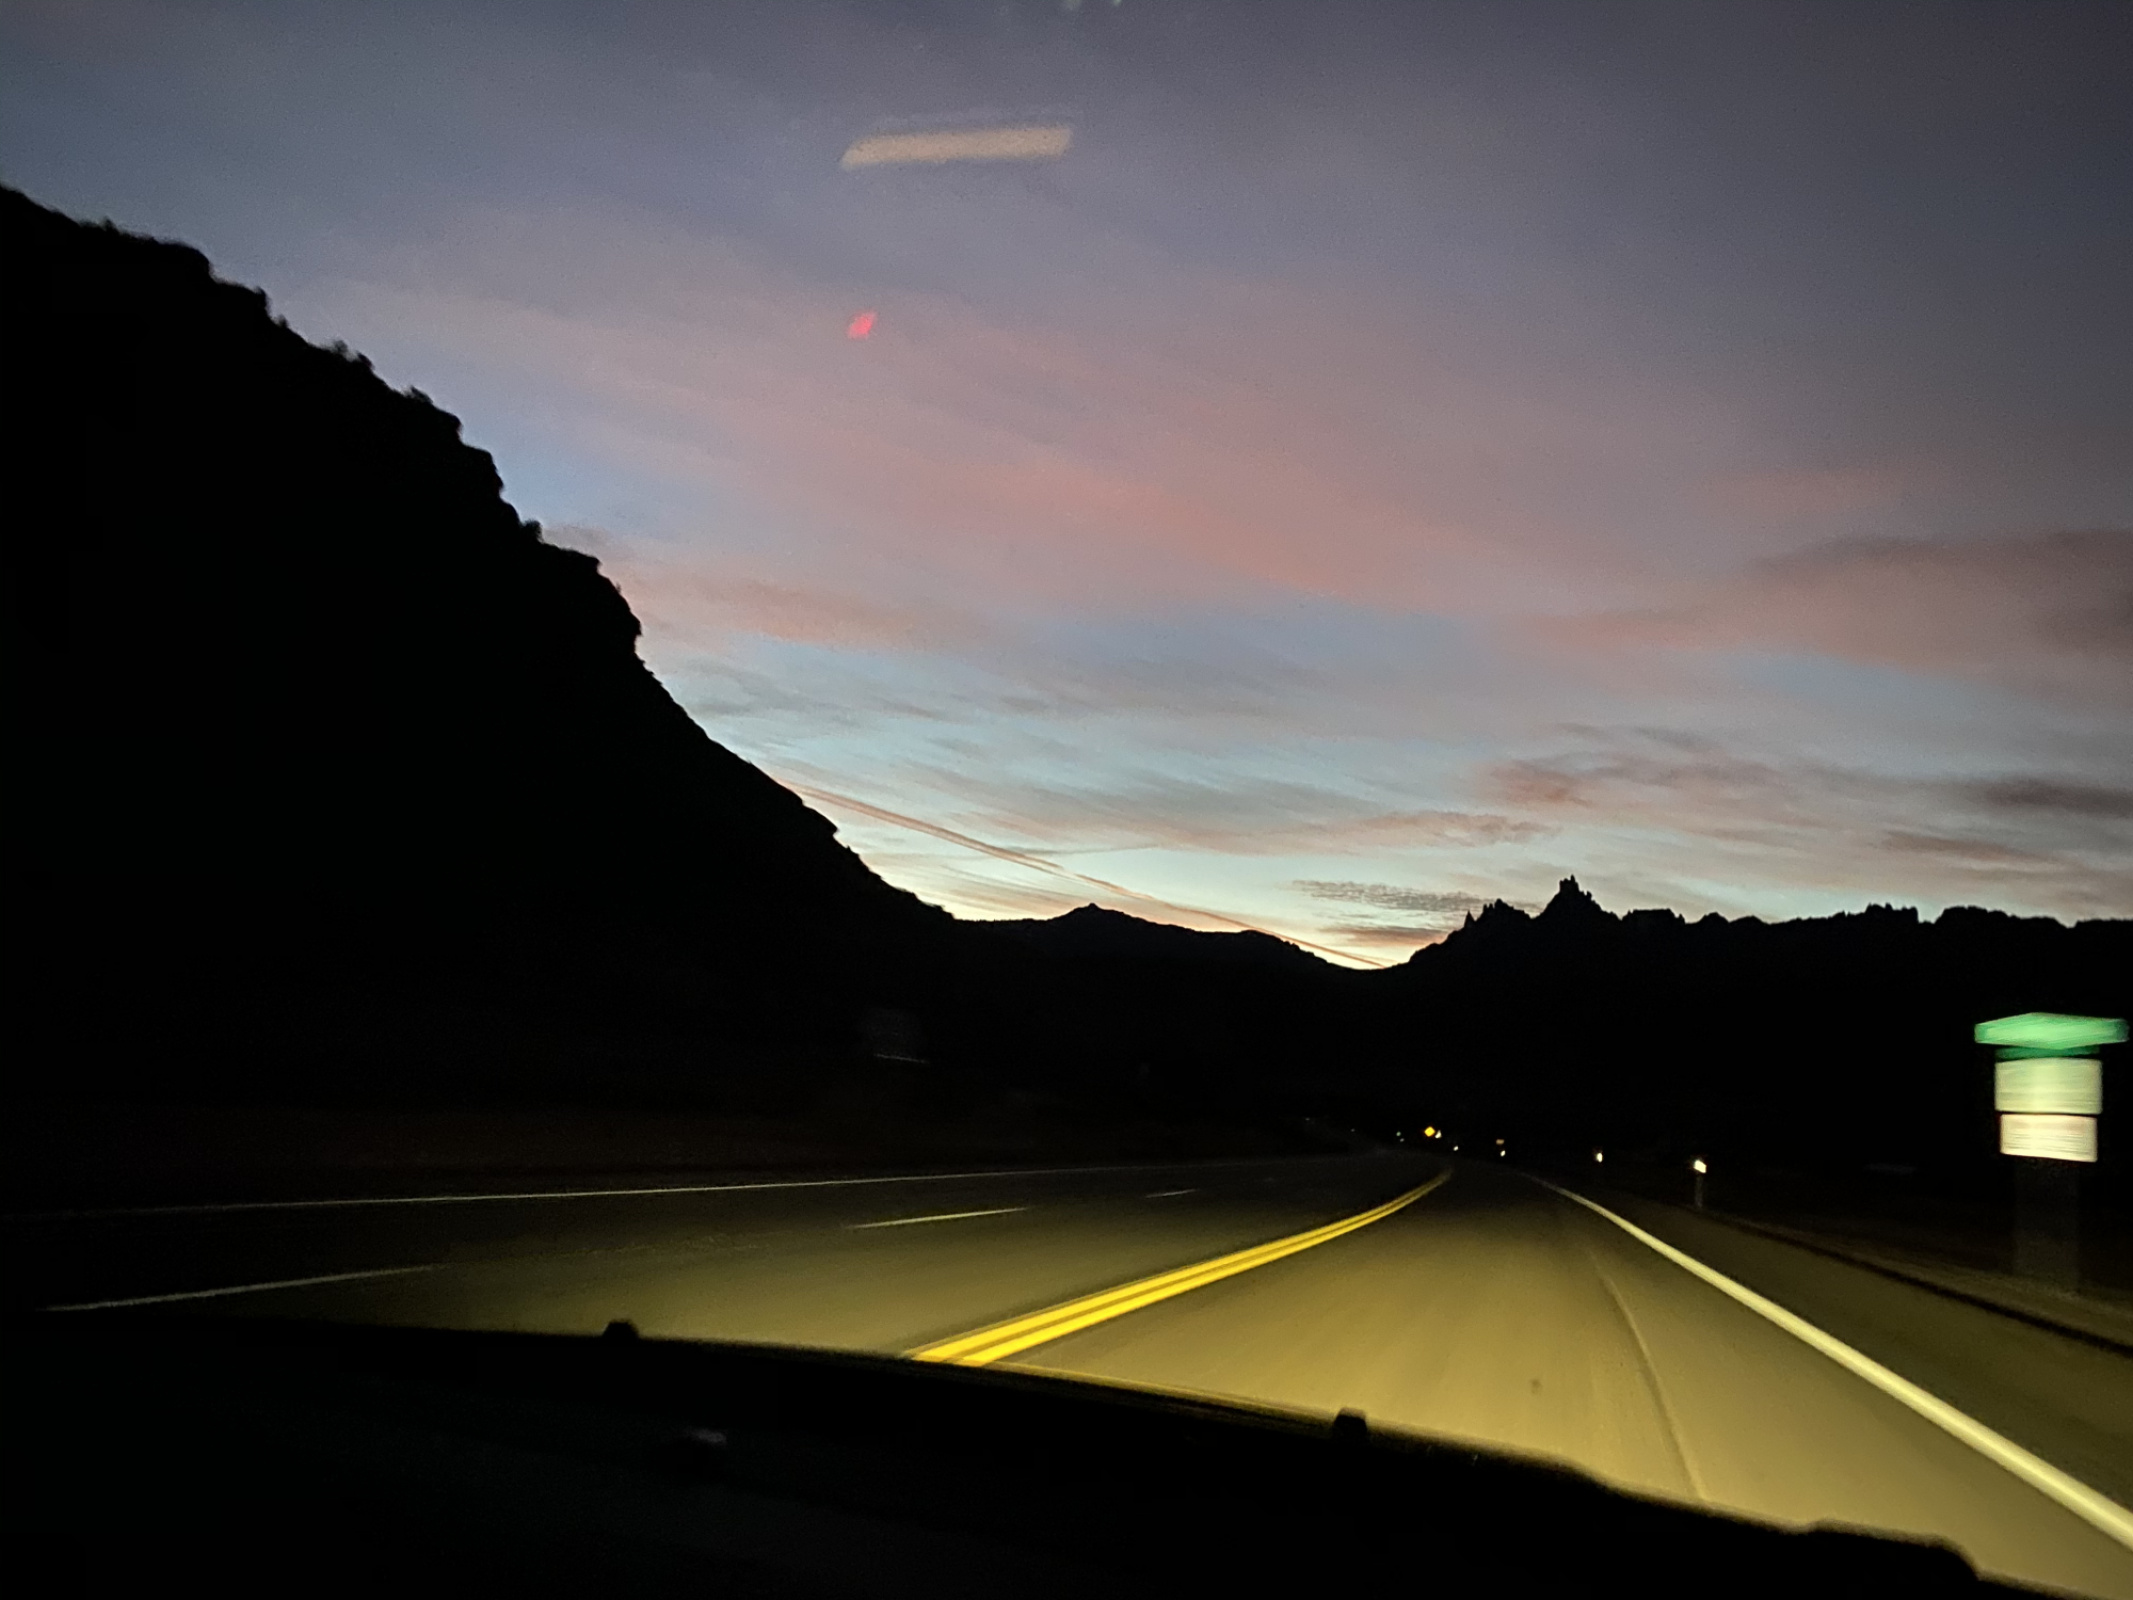 On the road into Zion National Park at 6:45 a.m.